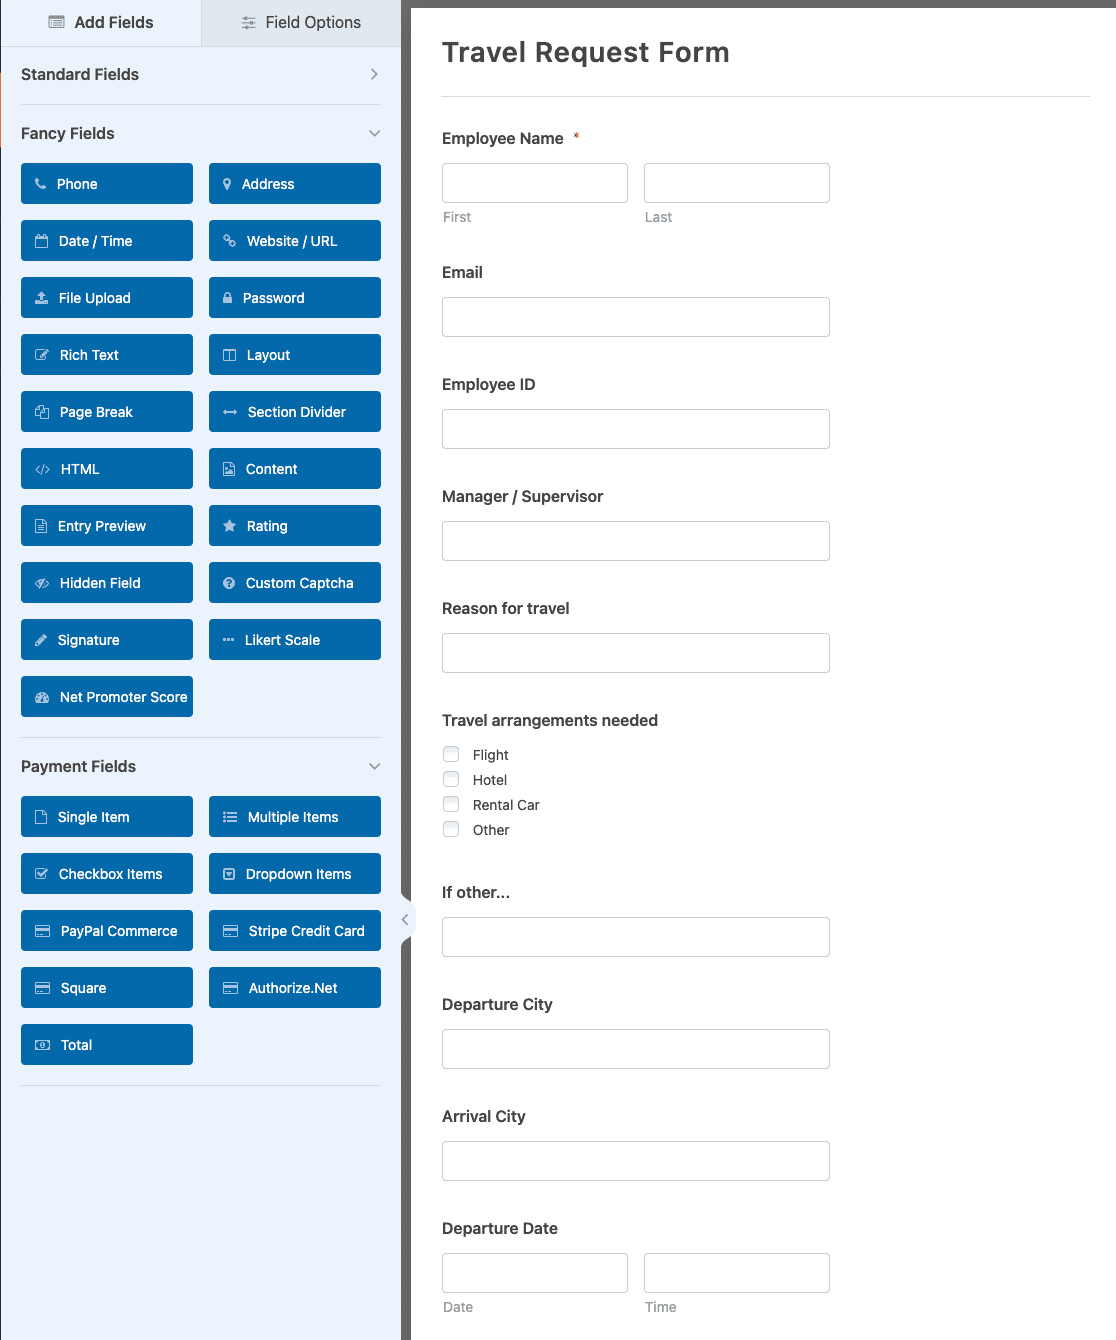 Customizing the Travel Request Form template